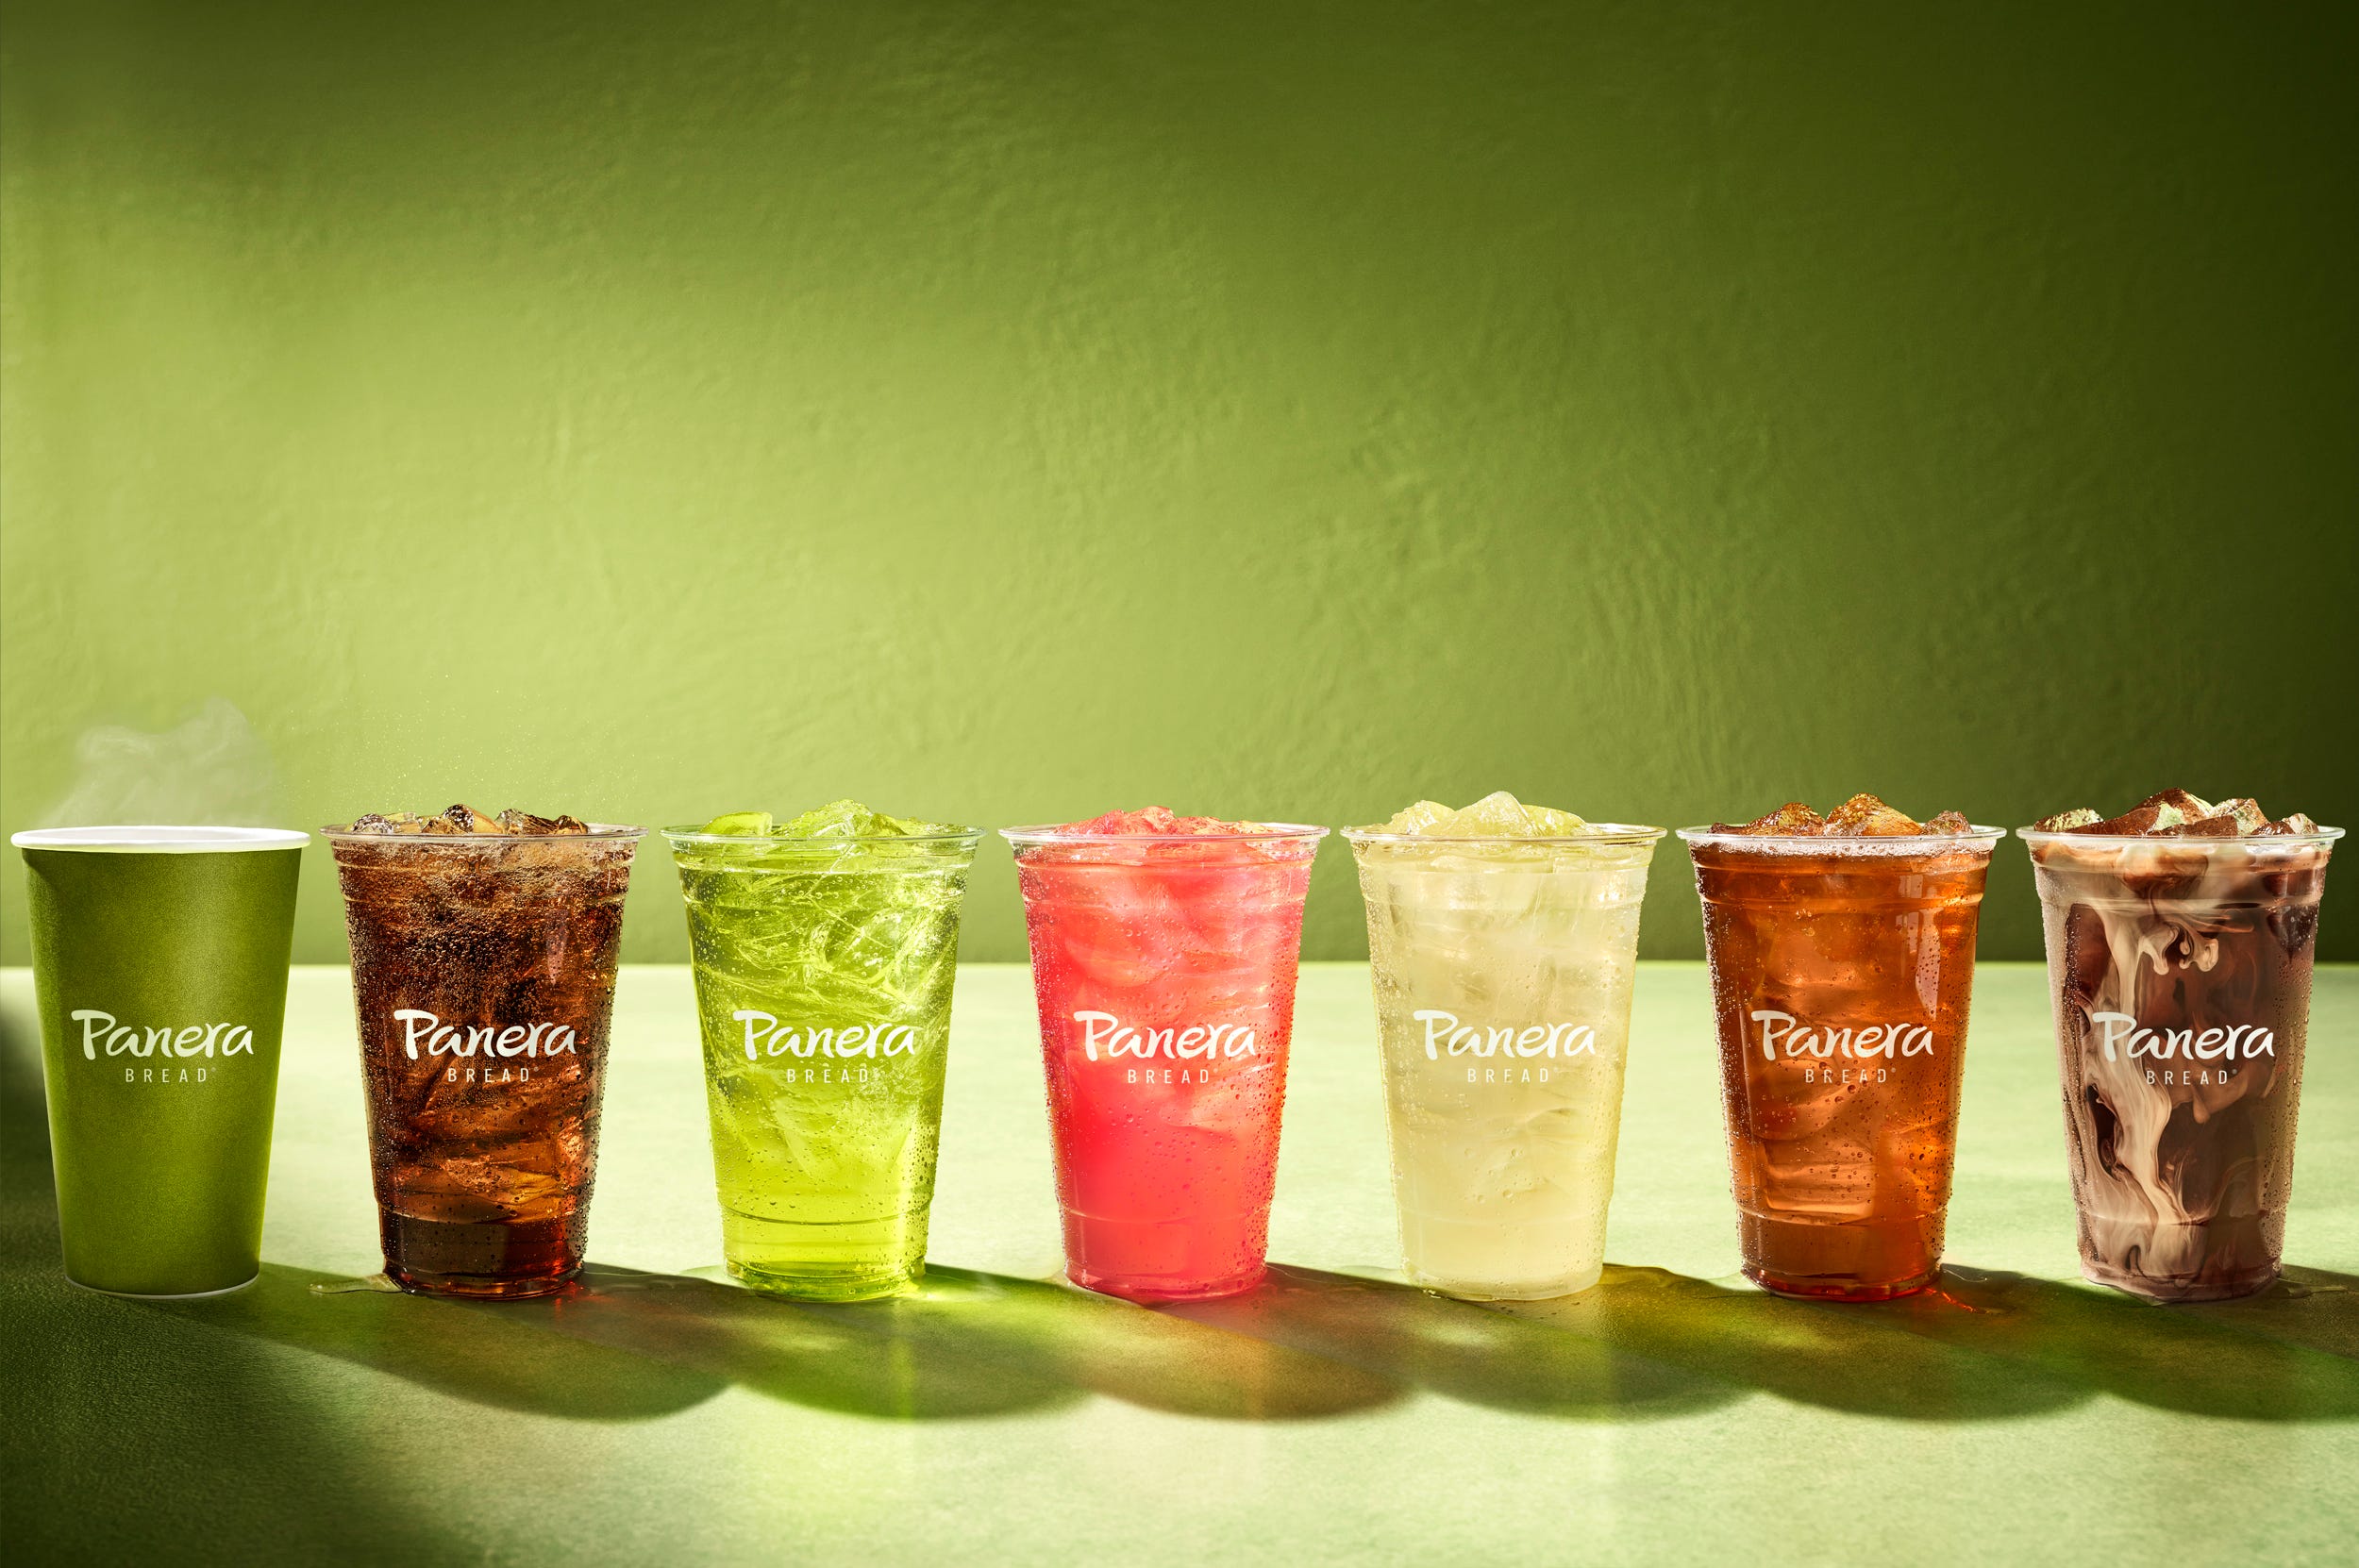 panera bread drops caffeinated charged lemonade drinks after series of lawsuits